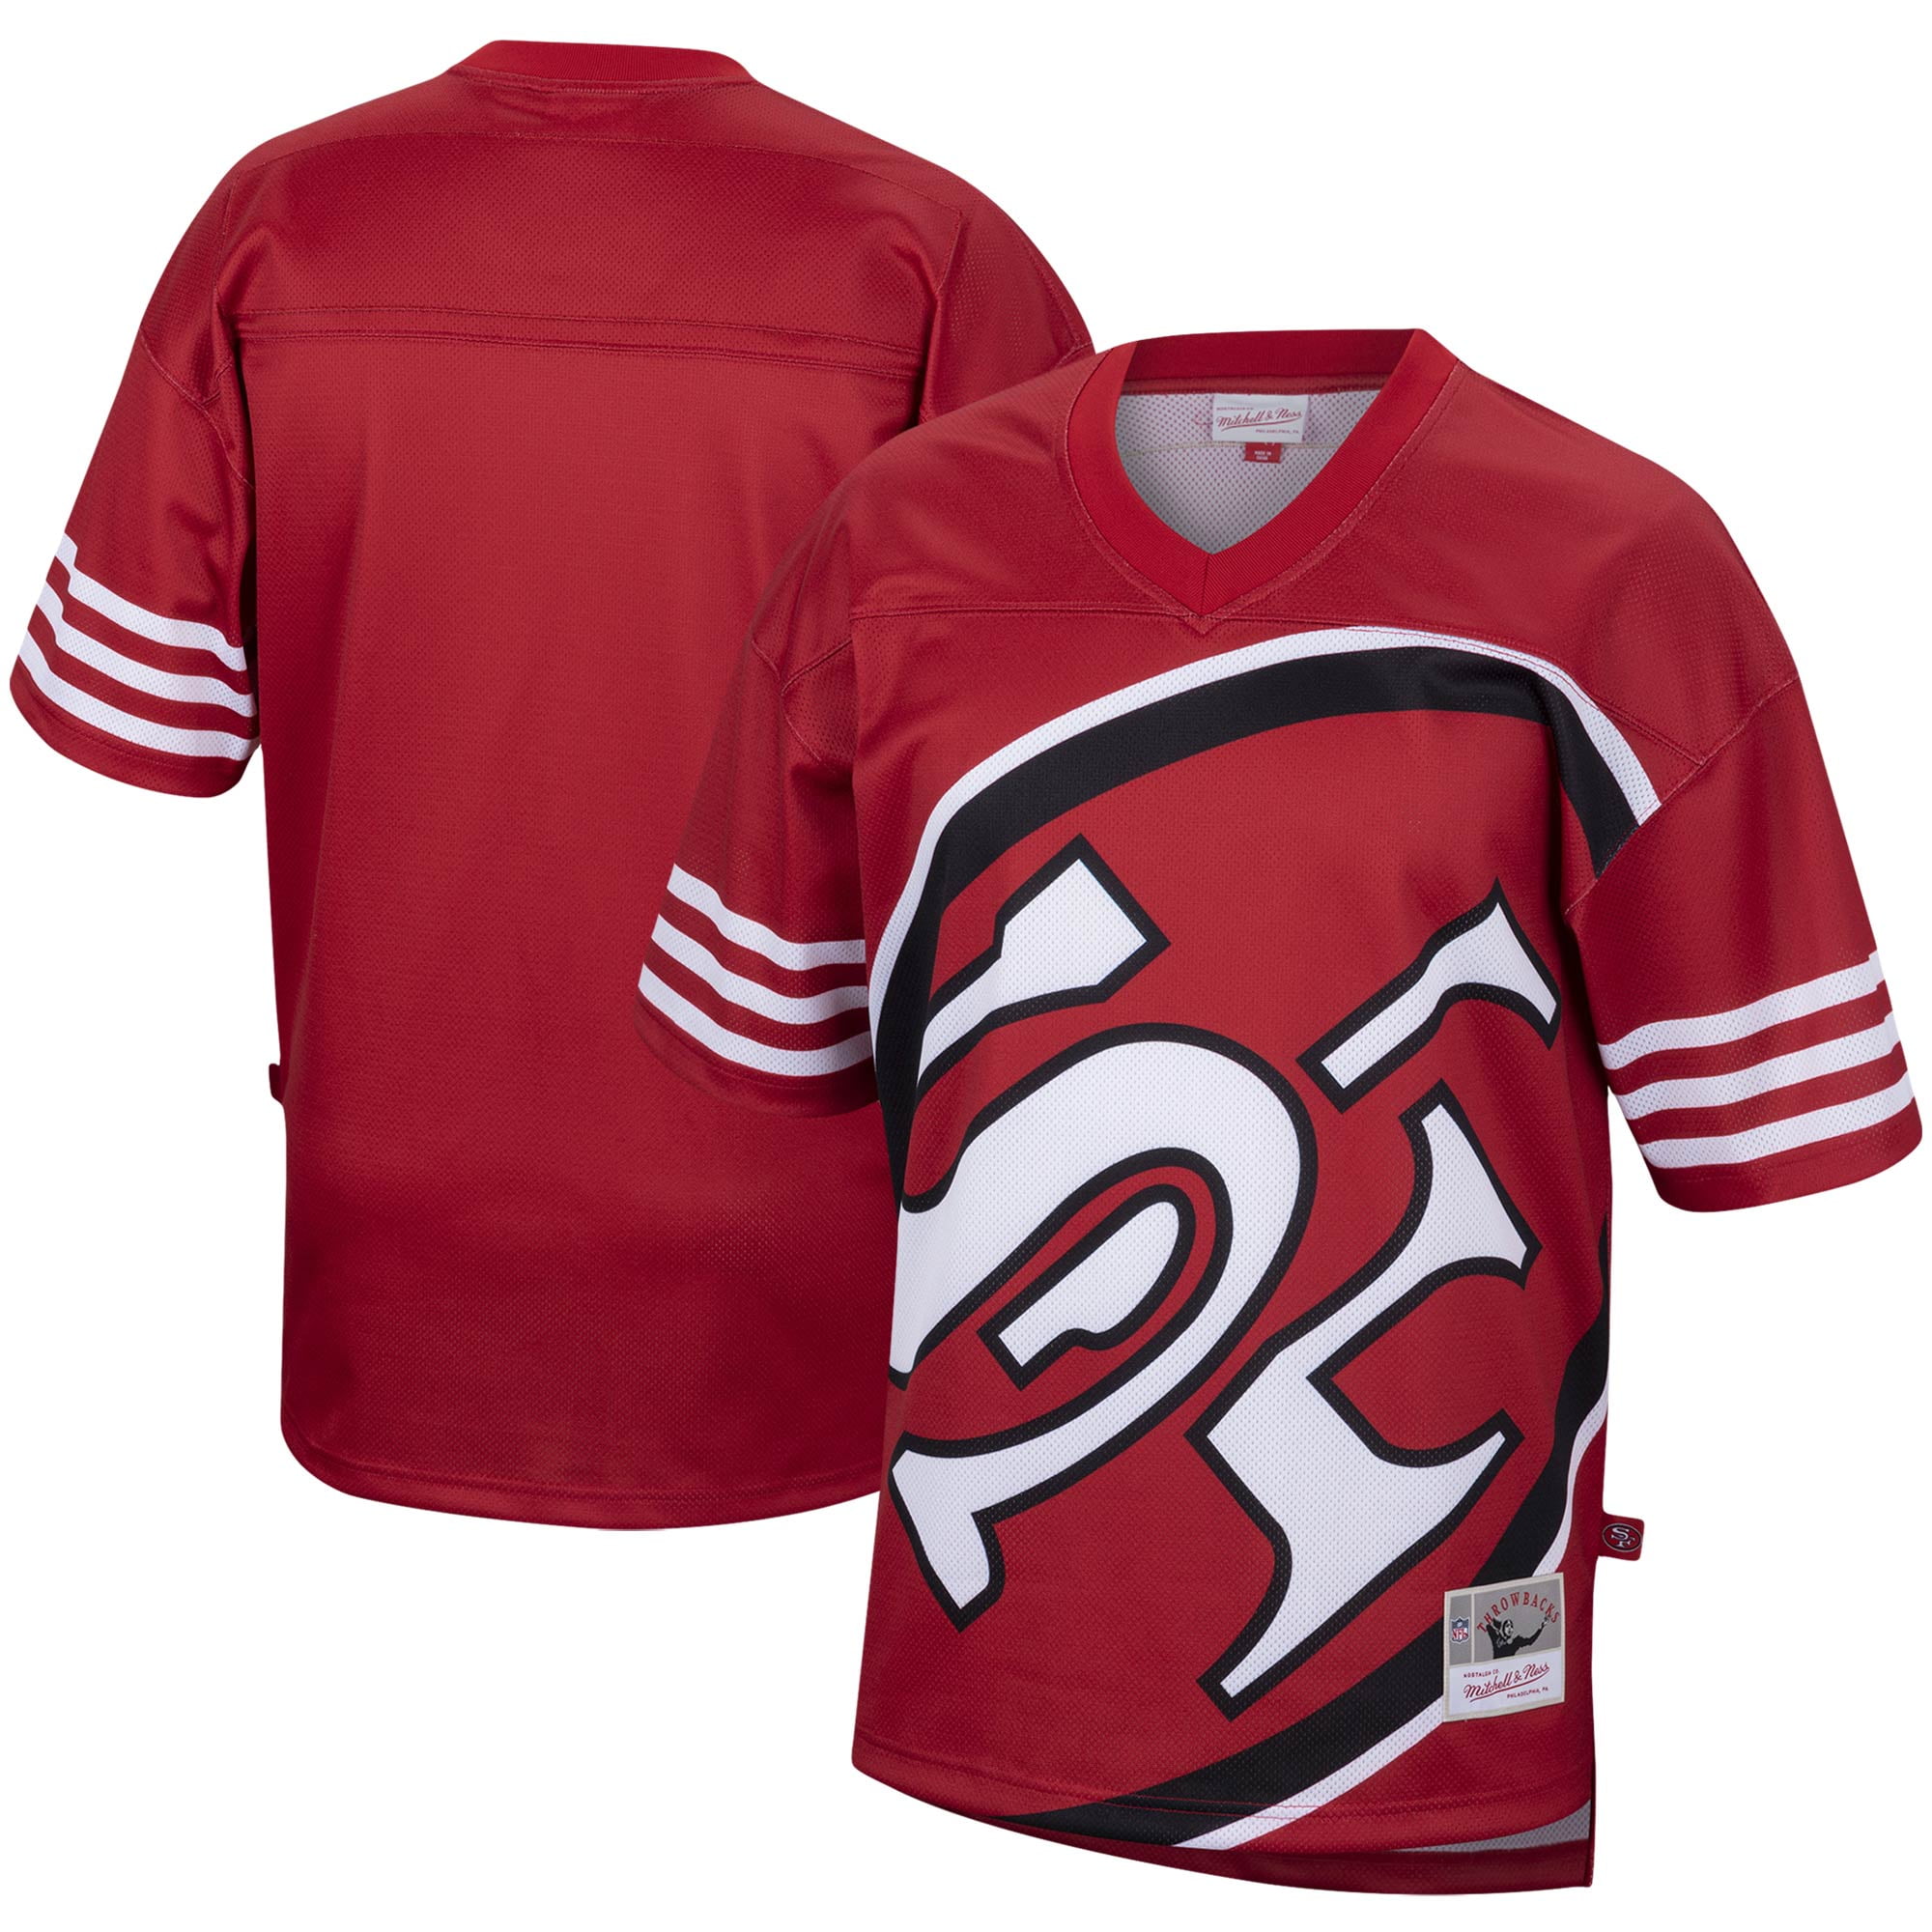 49ers mitchell and ness jersey